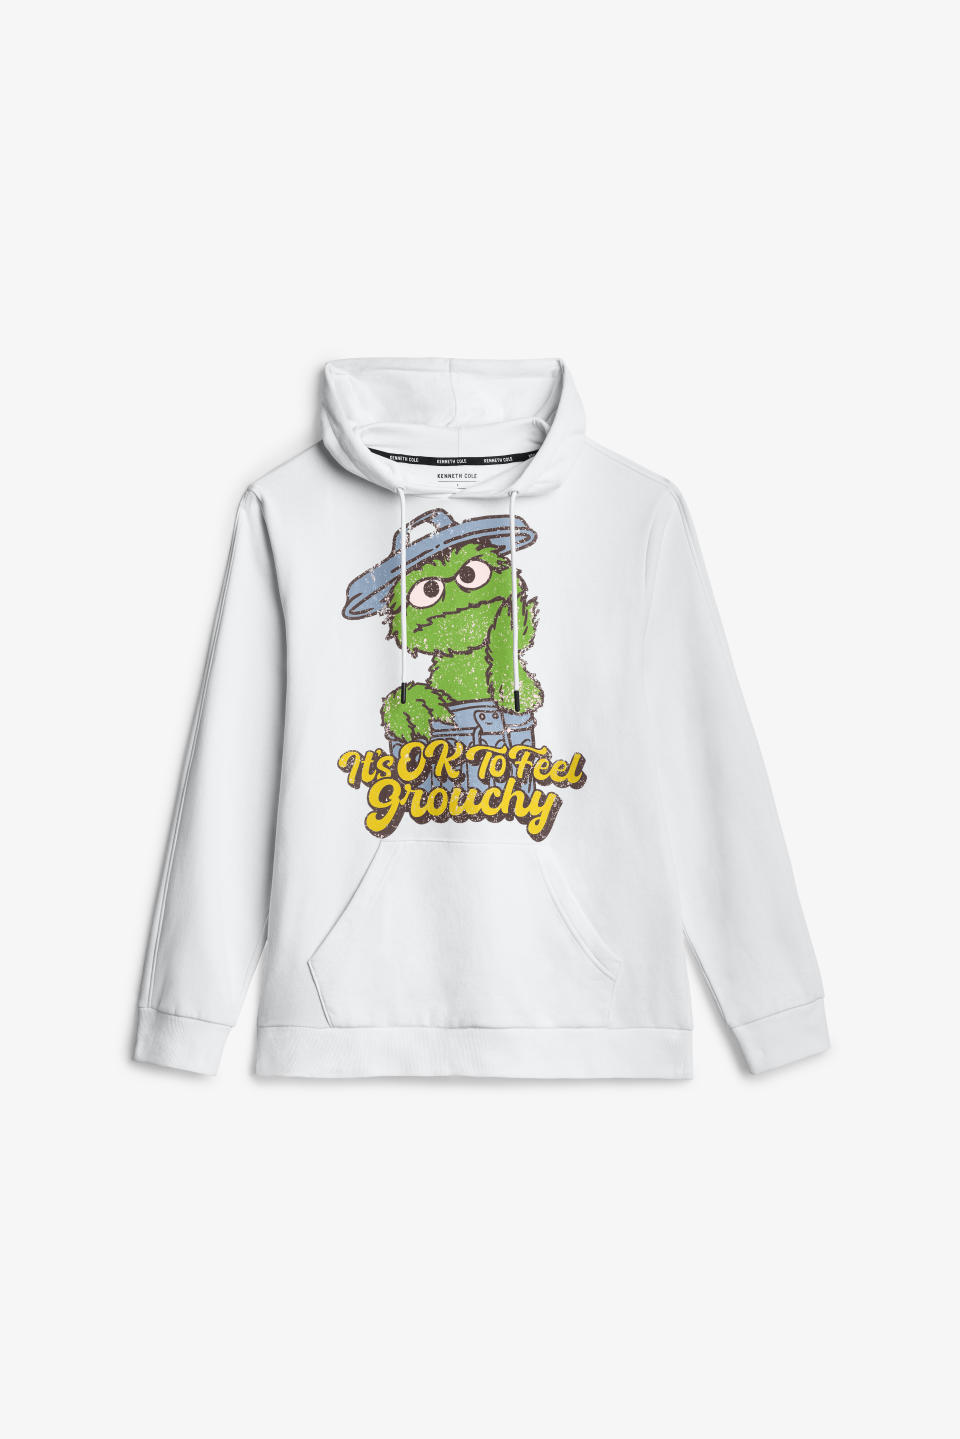 "It's OK to Feel Grouchy" hoodie from Kenneth Cole and Sesame Workshop. 